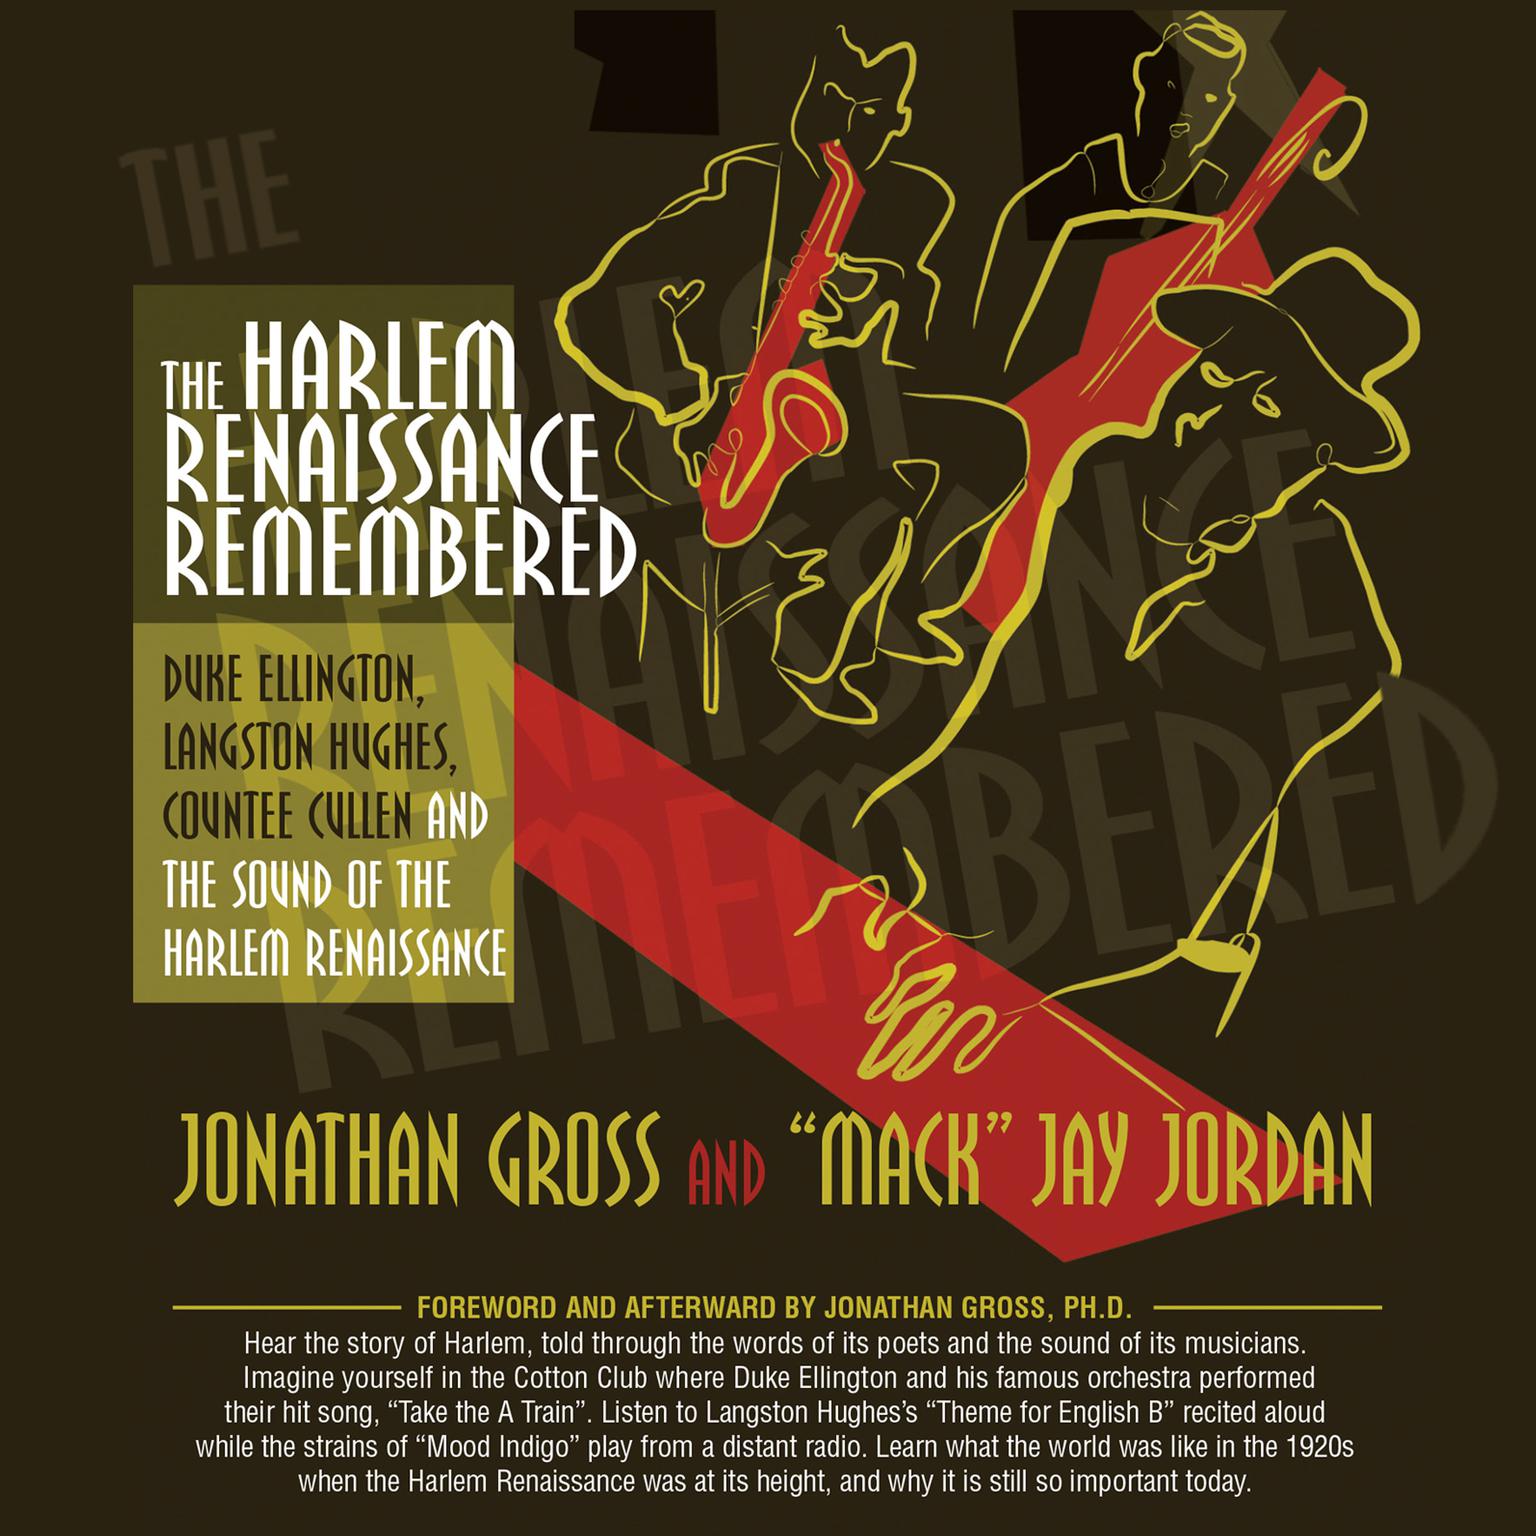 The Harlem Renaissance Remembered: Duke Ellington, Langston Hughes, Countee Cullen and the Sound of the Harlem Renaissance Audiobook, by Jonathan Gross